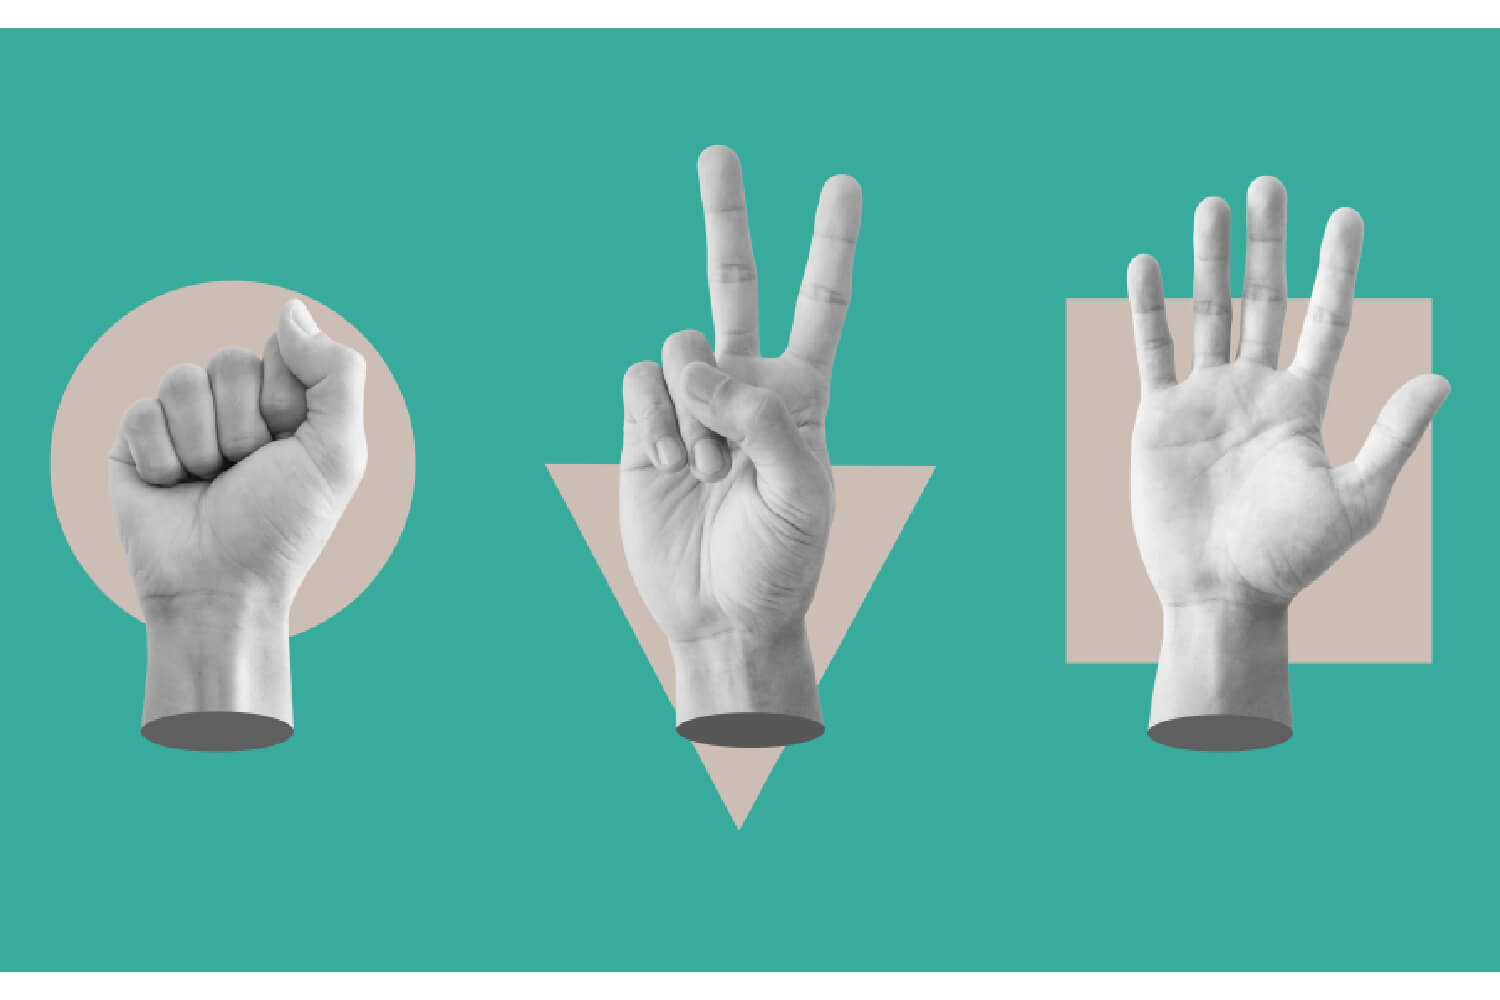 Rock, paper, scissors – Or how a new brand can make a difference